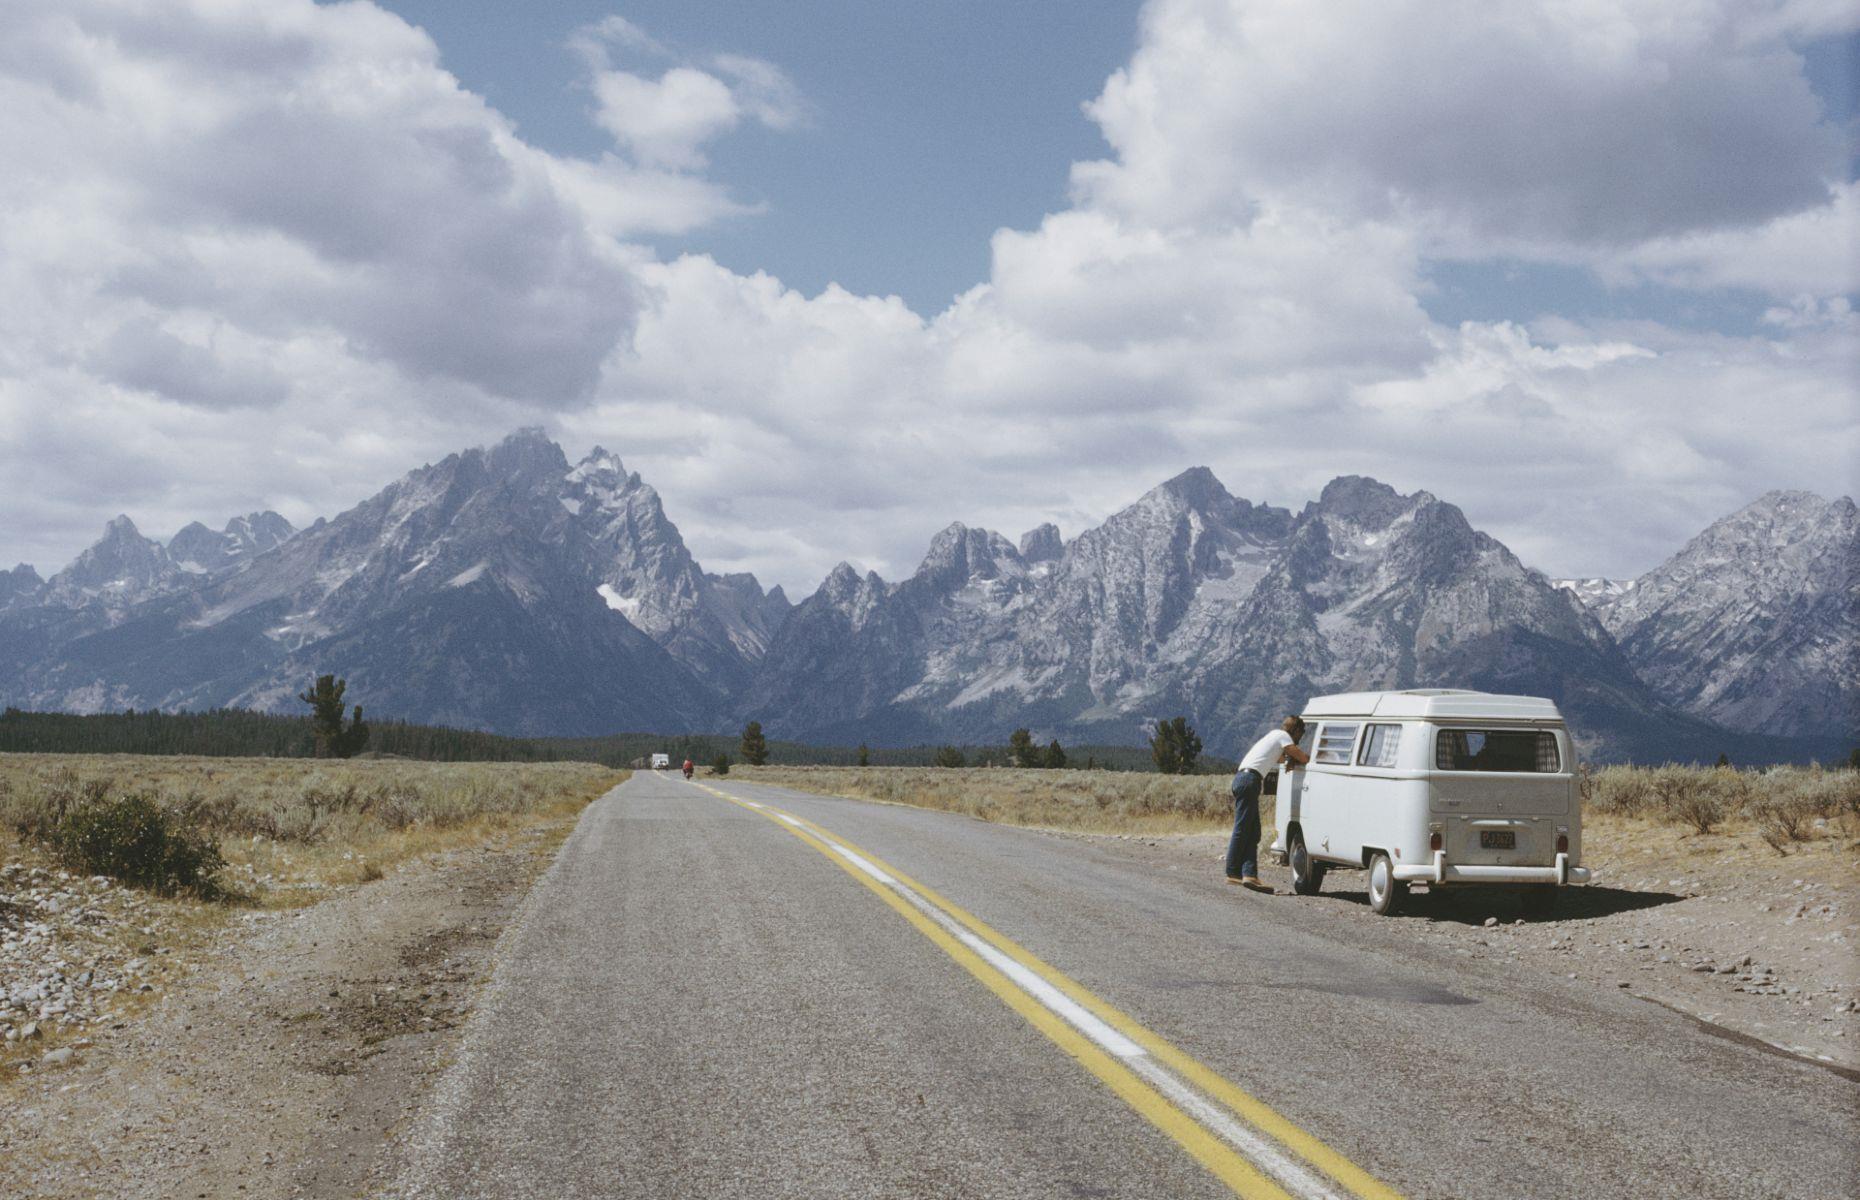 Camper vans became a big thing in the 1960s, when they were increasingly associated with the hippie counterculture of the time. Popular models included Volkswagen’s Type 1 and Type 2 Transporters and Dodge & Chevy’s Dodge A100. Seen here is a van parked up by the Teton Range of the Rocky Mountains in Wyoming.